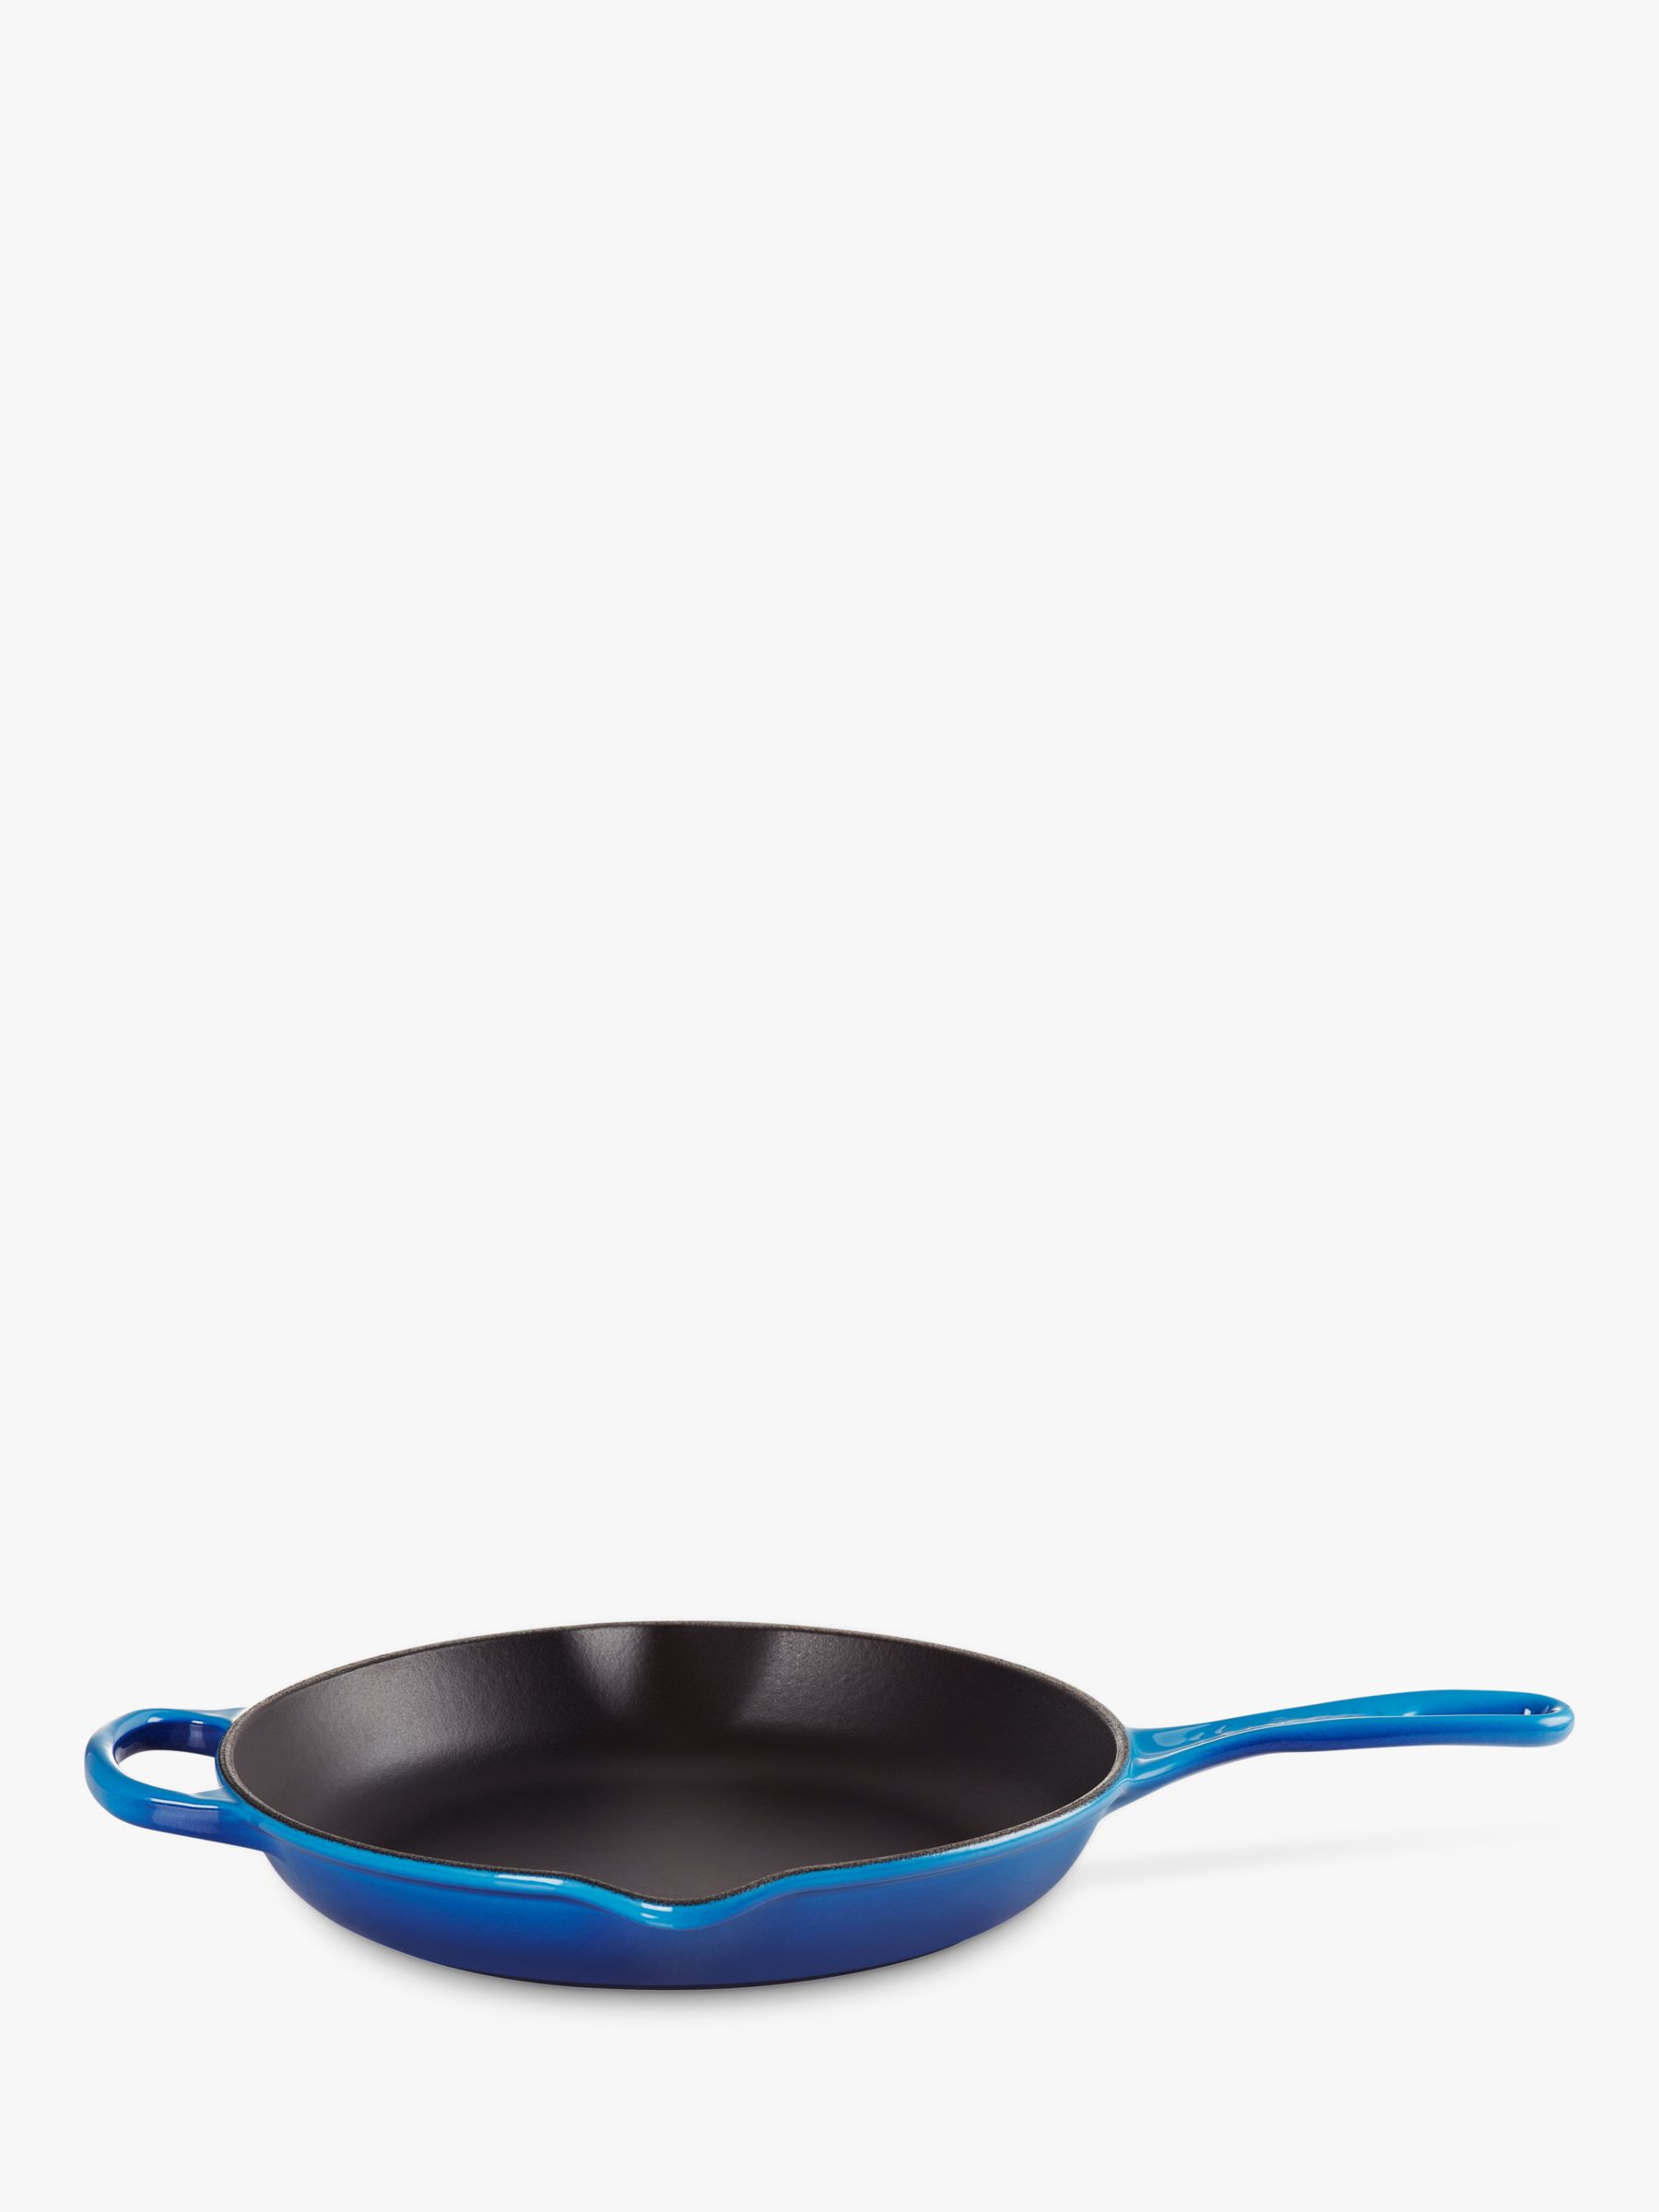 Jean Patrique Lazy Pan for Breakfast Egg Poacher Frying Pan with Multi  Sections Griddle Non Stick Pans for Gas, Electric, Induction & Oven Lighter